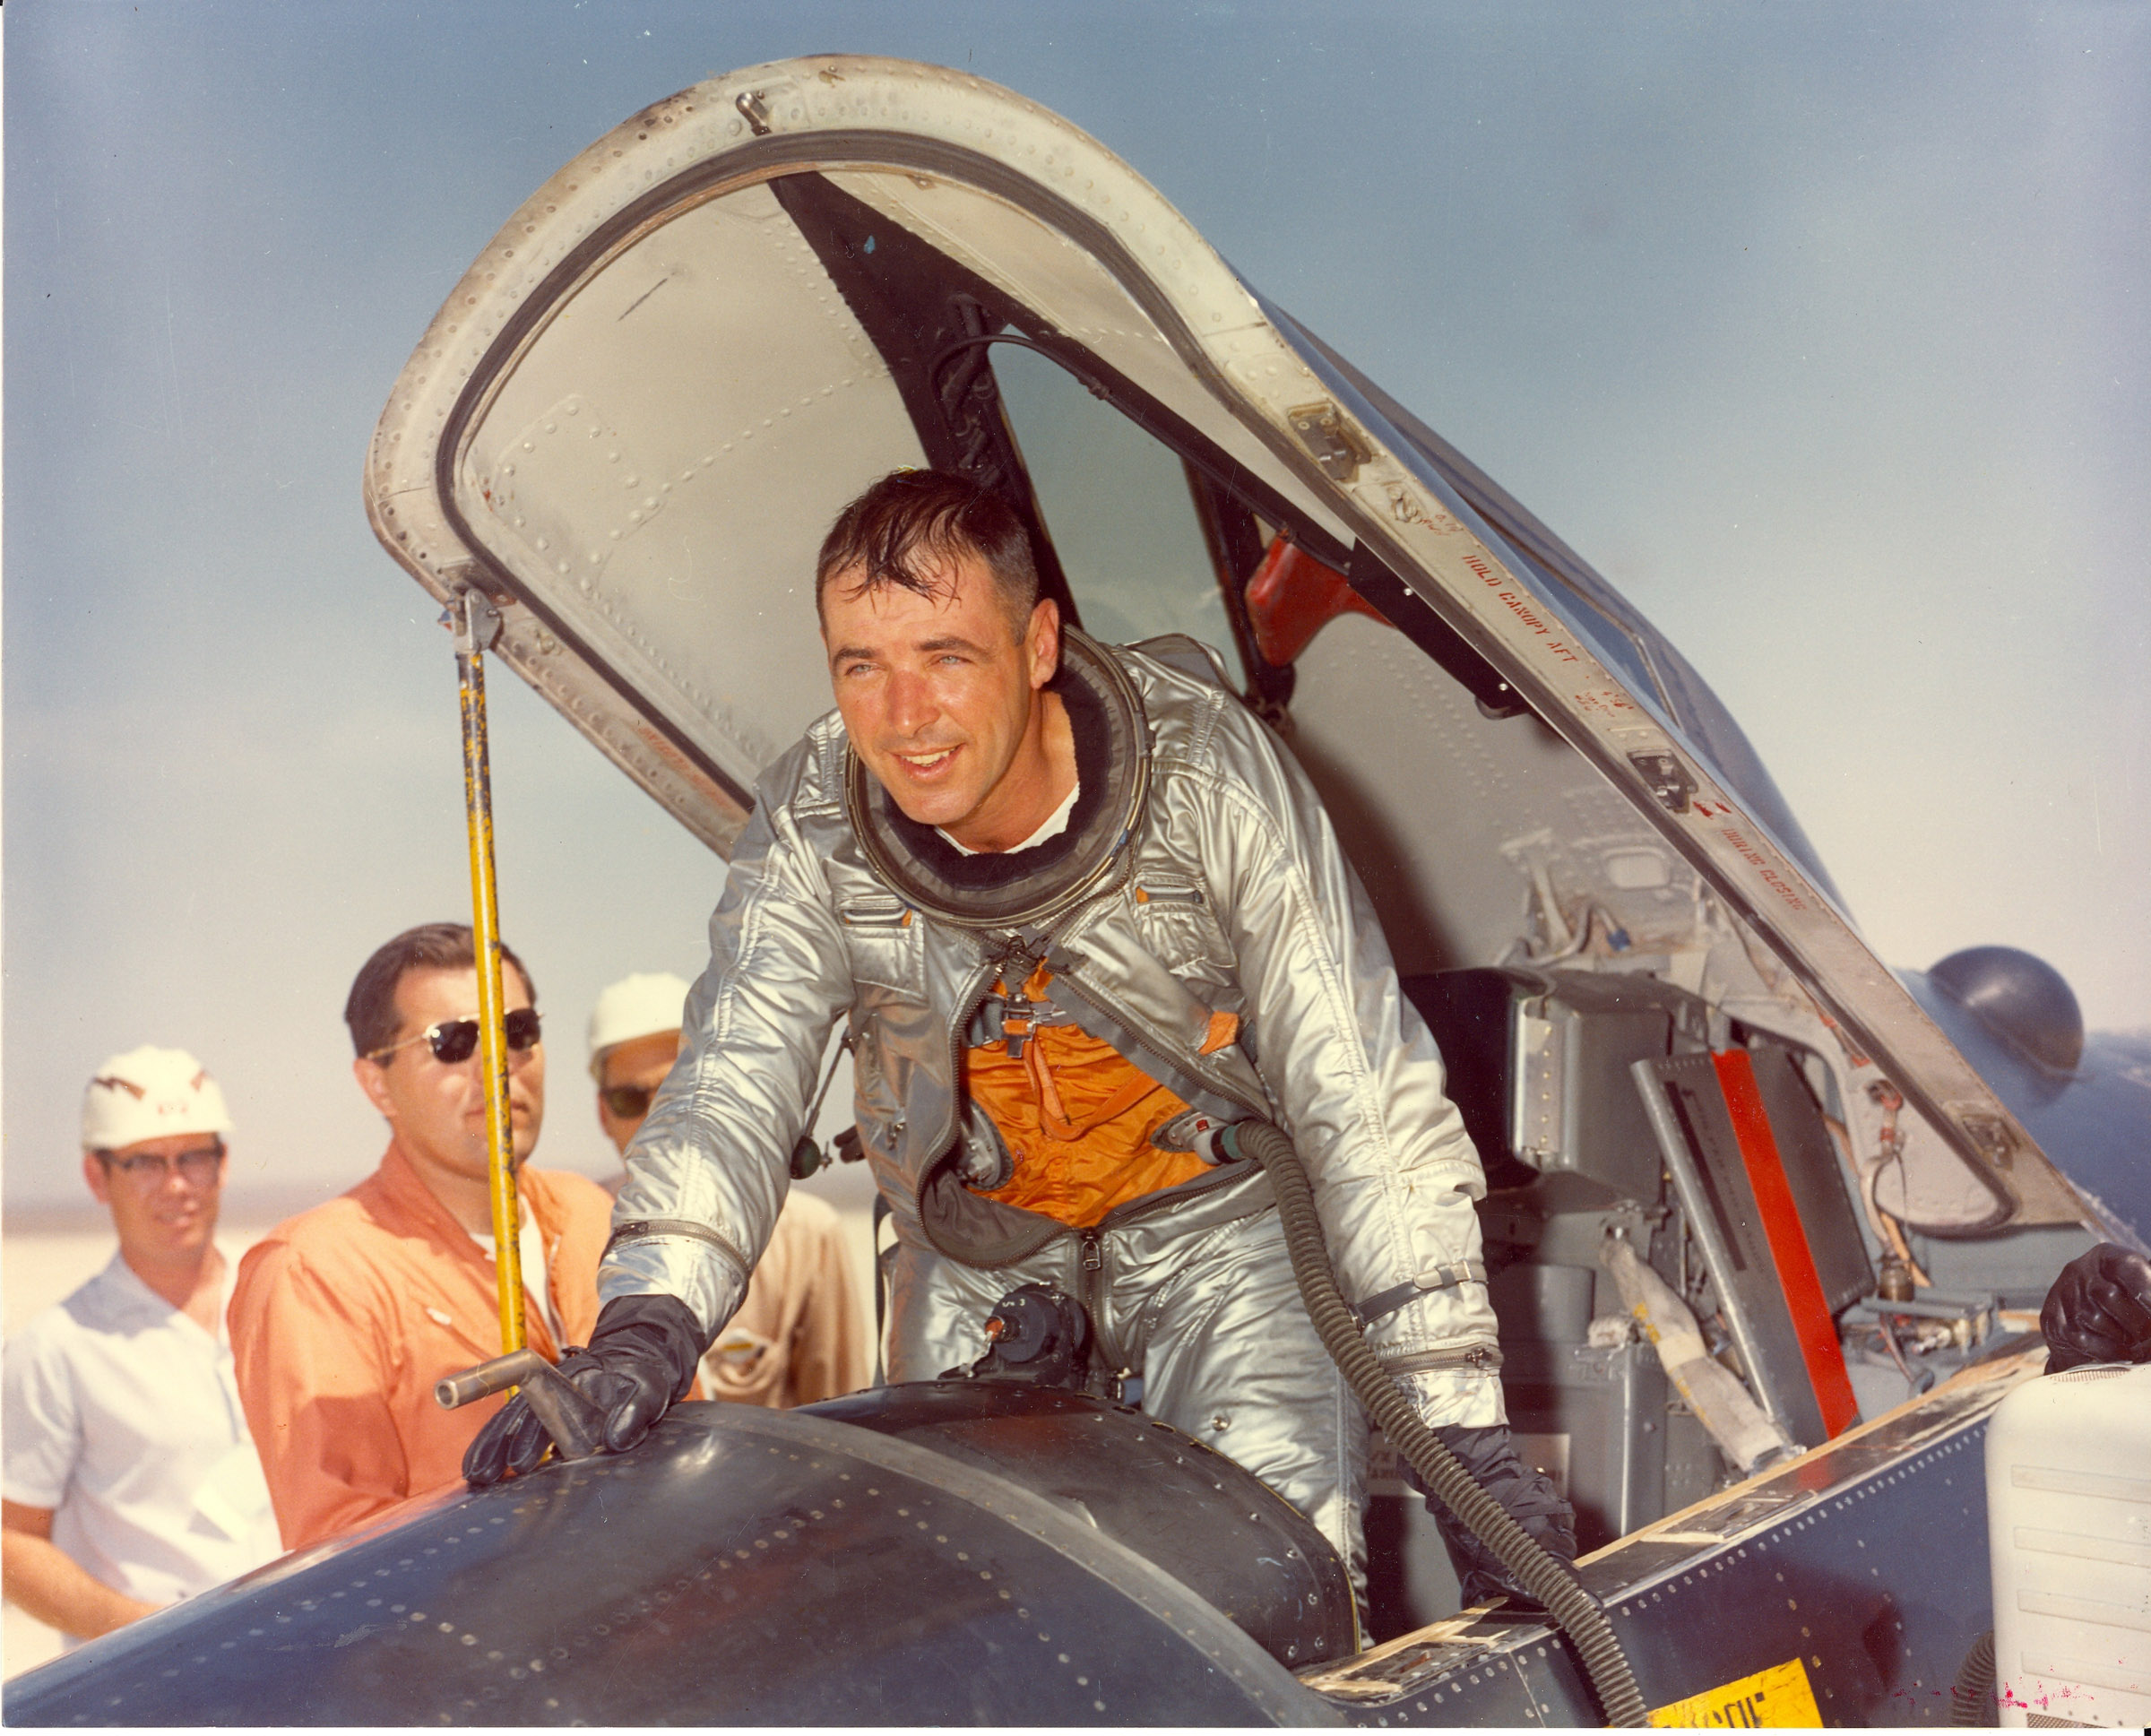 Major Robert M. White exits the cockpit of an X-15 at Edwards AFB. White is wearing a David Clark Co. MC-2 full-pressure suit. (U.S. Air Force)